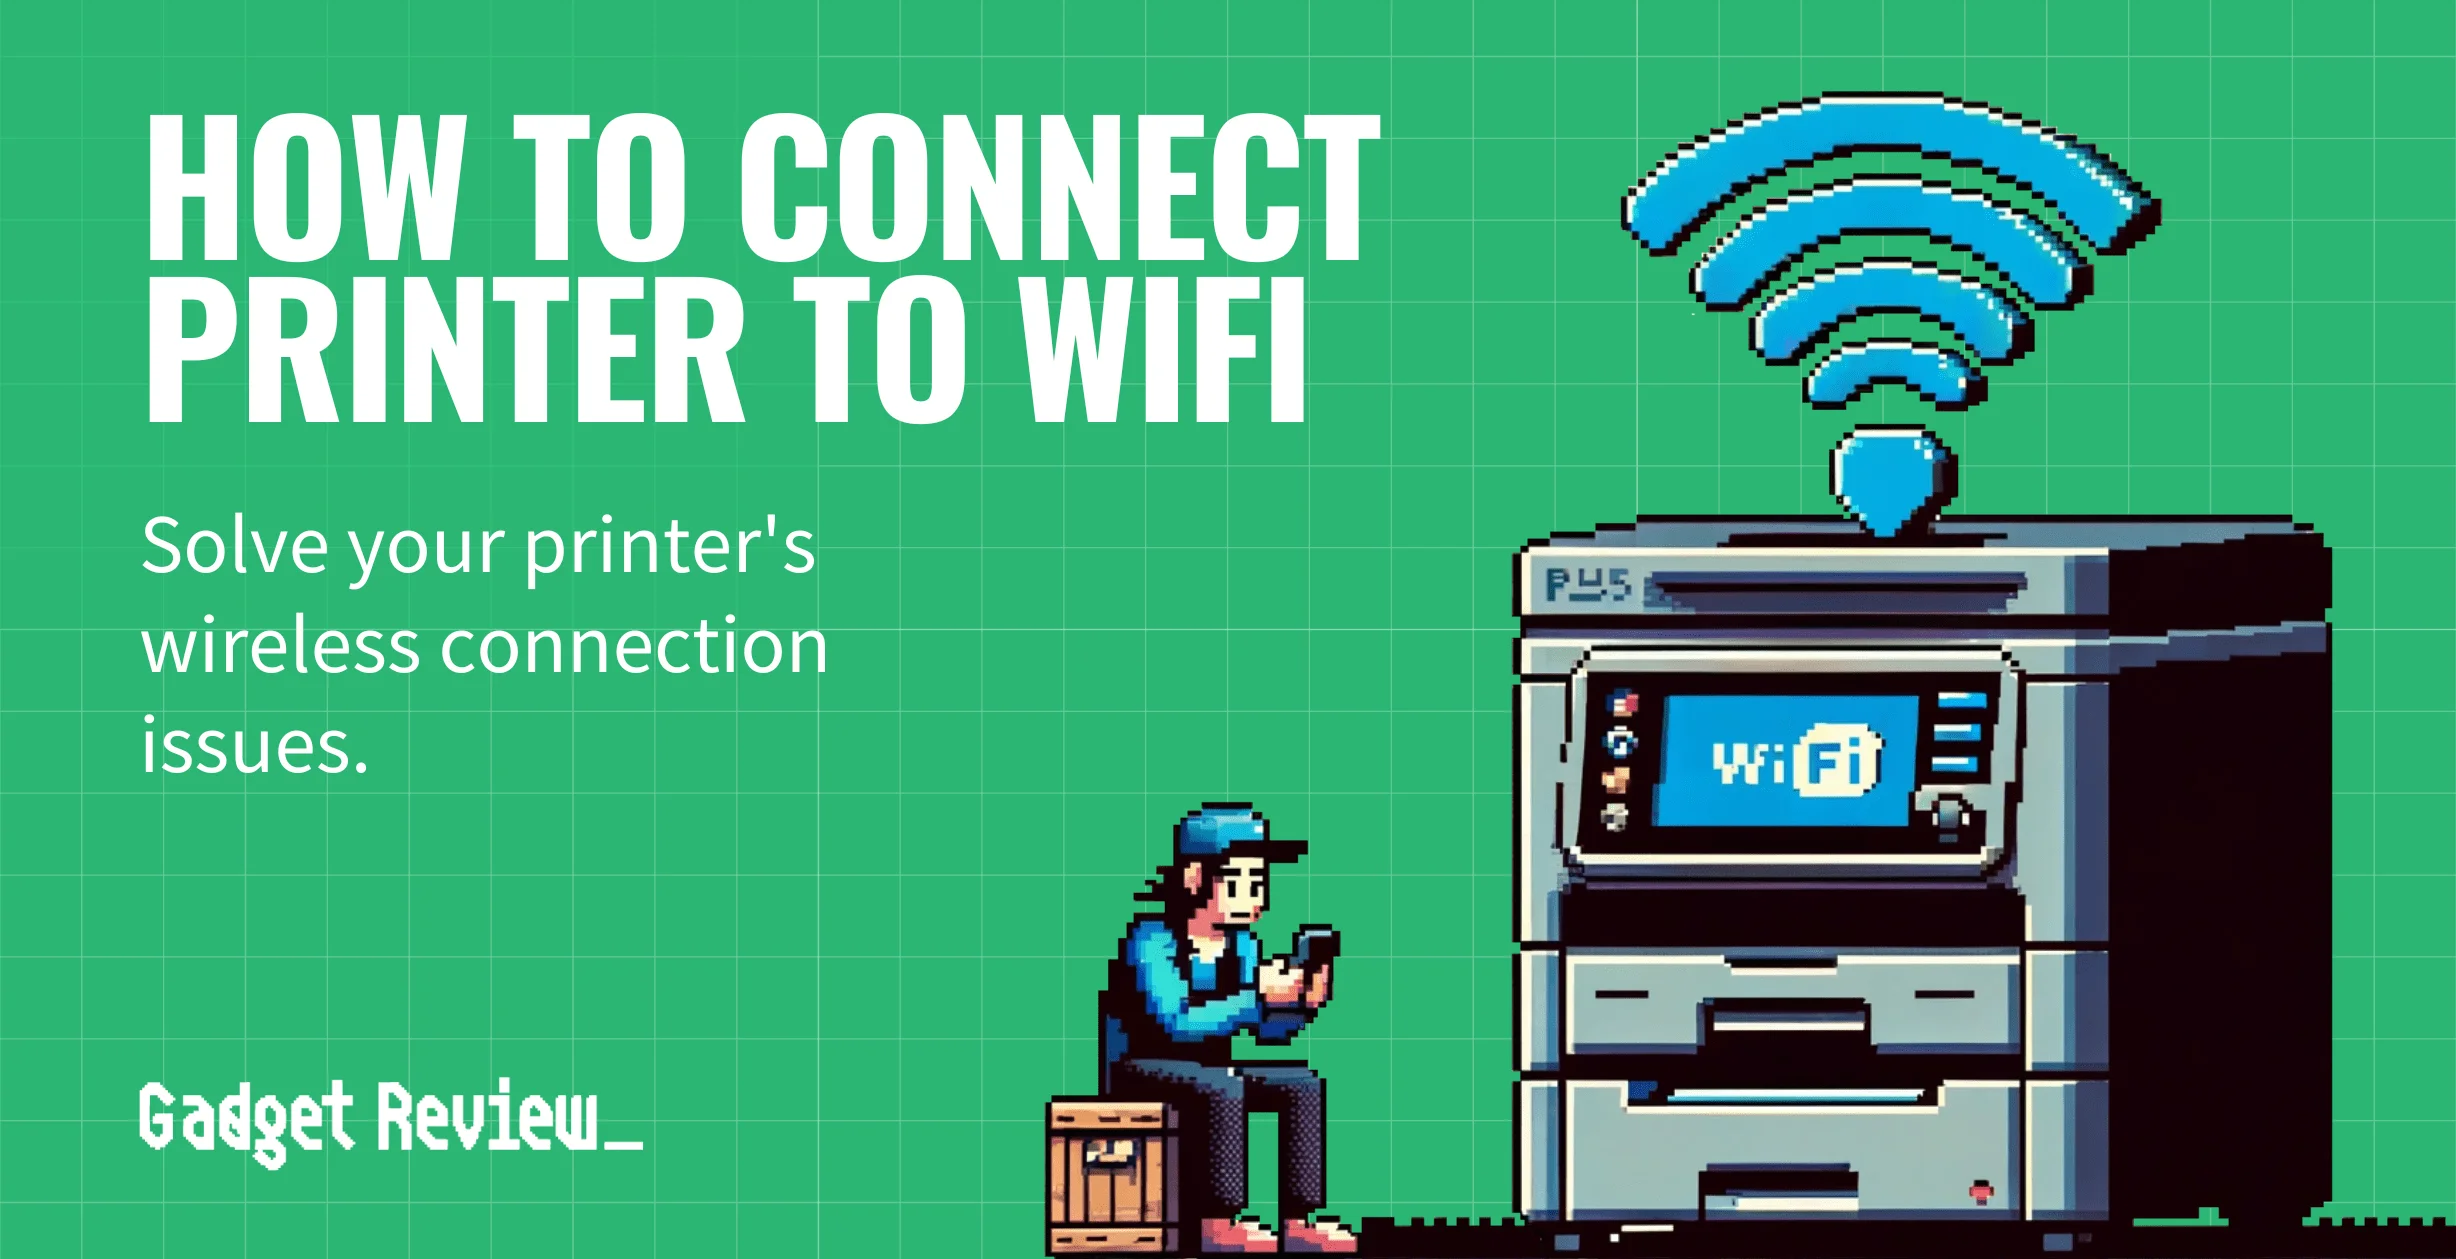 How to Connect a Printer to Wi-Fi